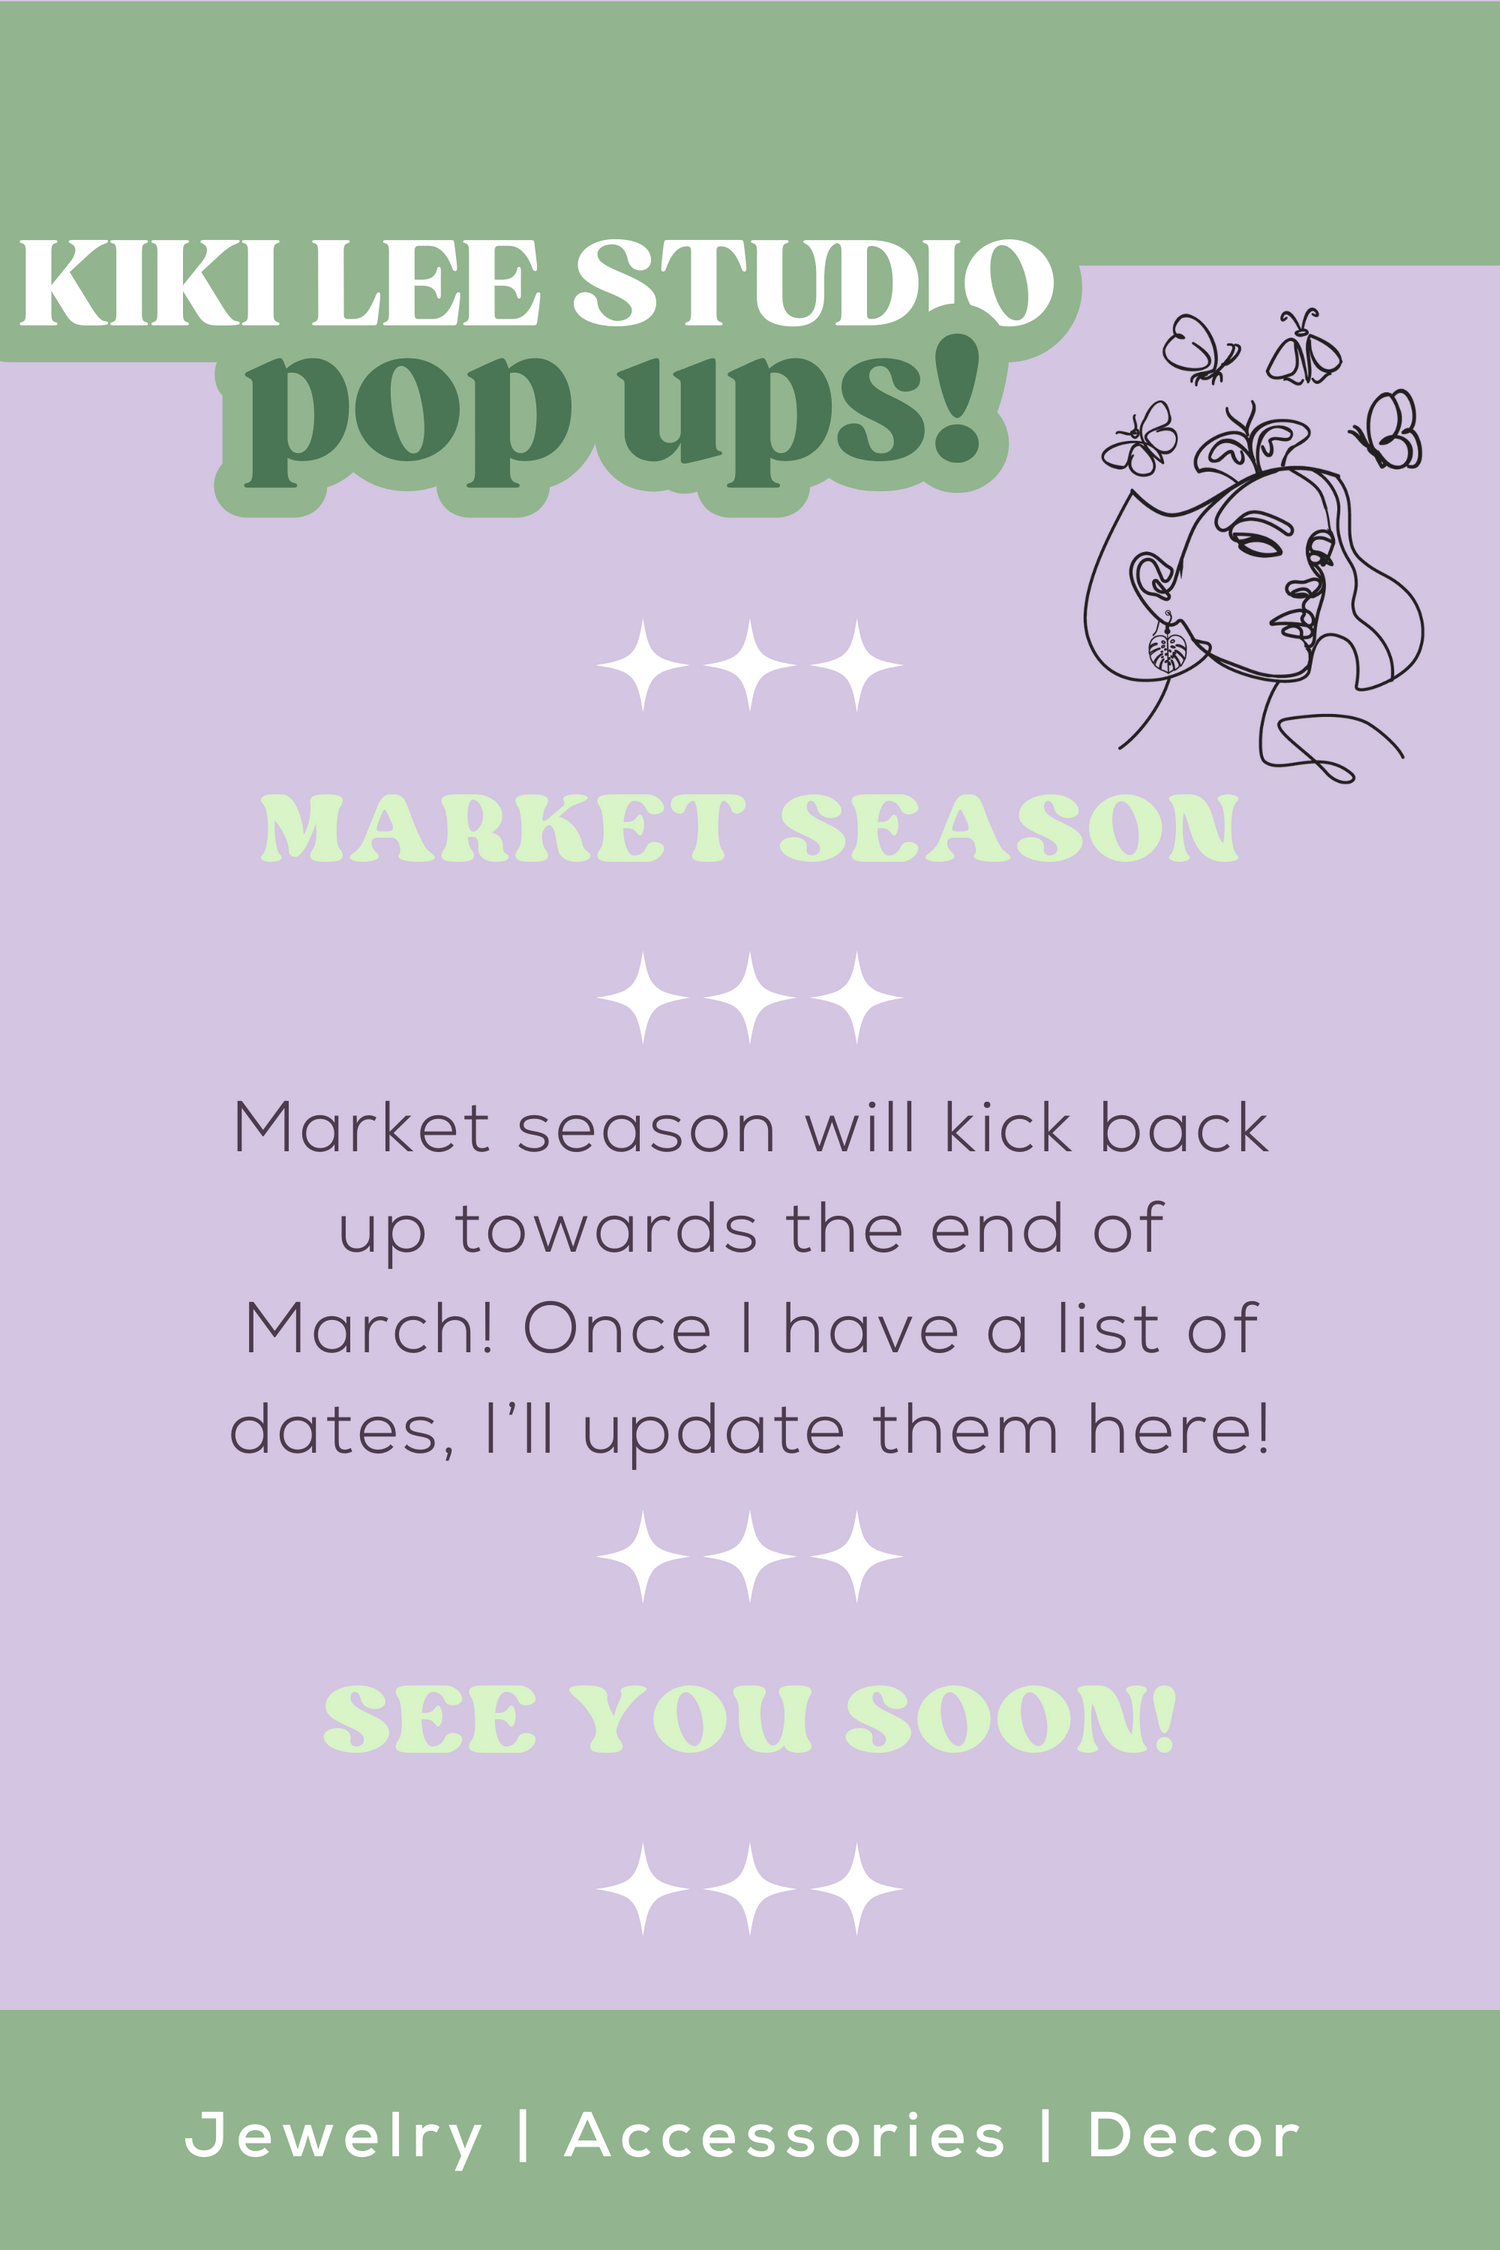 Market season will kick back up towards the end of March! Once I have a list of dates, I'll update them here! See You Soon!